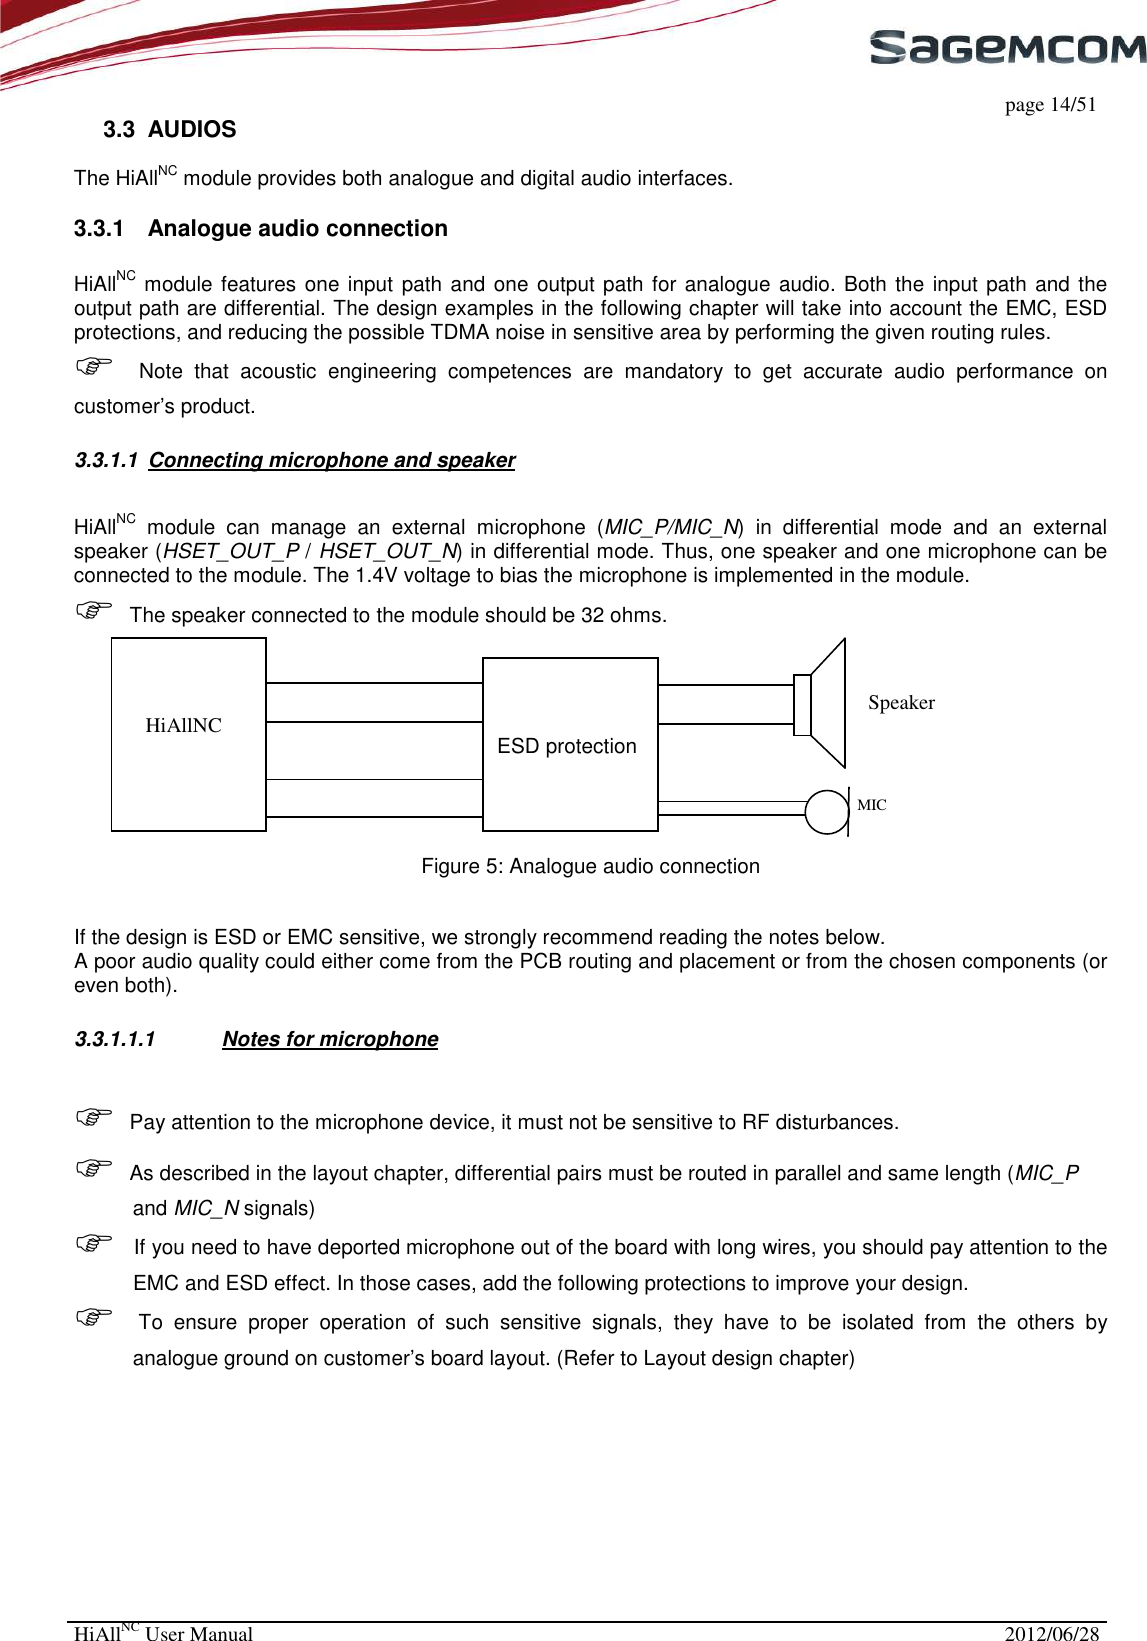     page 14/51 HiAllNC User Manual  2012/06/28  3.3  AUDIOS  The HiAllNC module provides both analogue and digital audio interfaces.  3.3.1  Analogue audio connection  HiAllNC module features one input path and one output path for analogue audio. Both the input path and the output path are differential. The design examples in the following chapter will take into account the EMC, ESD protections, and reducing the possible TDMA noise in sensitive area by performing the given routing rules.   Note  that  acoustic  engineering  competences  are  mandatory  to  get  accurate  audio  performance  on customer’s product. 3.3.1.1  Connecting microphone and speaker HiAllNC  module  can  manage  an  external  microphone  (MIC_P/MIC_N)  in  differential  mode  and  an  external speaker (HSET_OUT_P / HSET_OUT_N) in differential mode. Thus, one speaker and one microphone can be connected to the module. The 1.4V voltage to bias the microphone is implemented in the module.   The speaker connected to the module should be 32 ohms.                                                                           ESD protection       Figure 5: Analogue audio connection   If the design is ESD or EMC sensitive, we strongly recommend reading the notes below. A poor audio quality could either come from the PCB routing and placement or from the chosen components (or even both). 3.3.1.1.1  Notes for microphone  Pay attention to the microphone device, it must not be sensitive to RF disturbances.  As described in the layout chapter, differential pairs must be routed in parallel and same length (MIC_P and MIC_N signals)  If you need to have deported microphone out of the board with long wires, you should pay attention to the EMC and ESD effect. In those cases, add the following protections to improve your design.  To  ensure  proper  operation  of  such  sensitive  signals,  they  have  to  be  isolated  from  the  others  by analogue ground on customer’s board layout. (Refer to Layout design chapter)        HiAllNC    Speaker MIC 